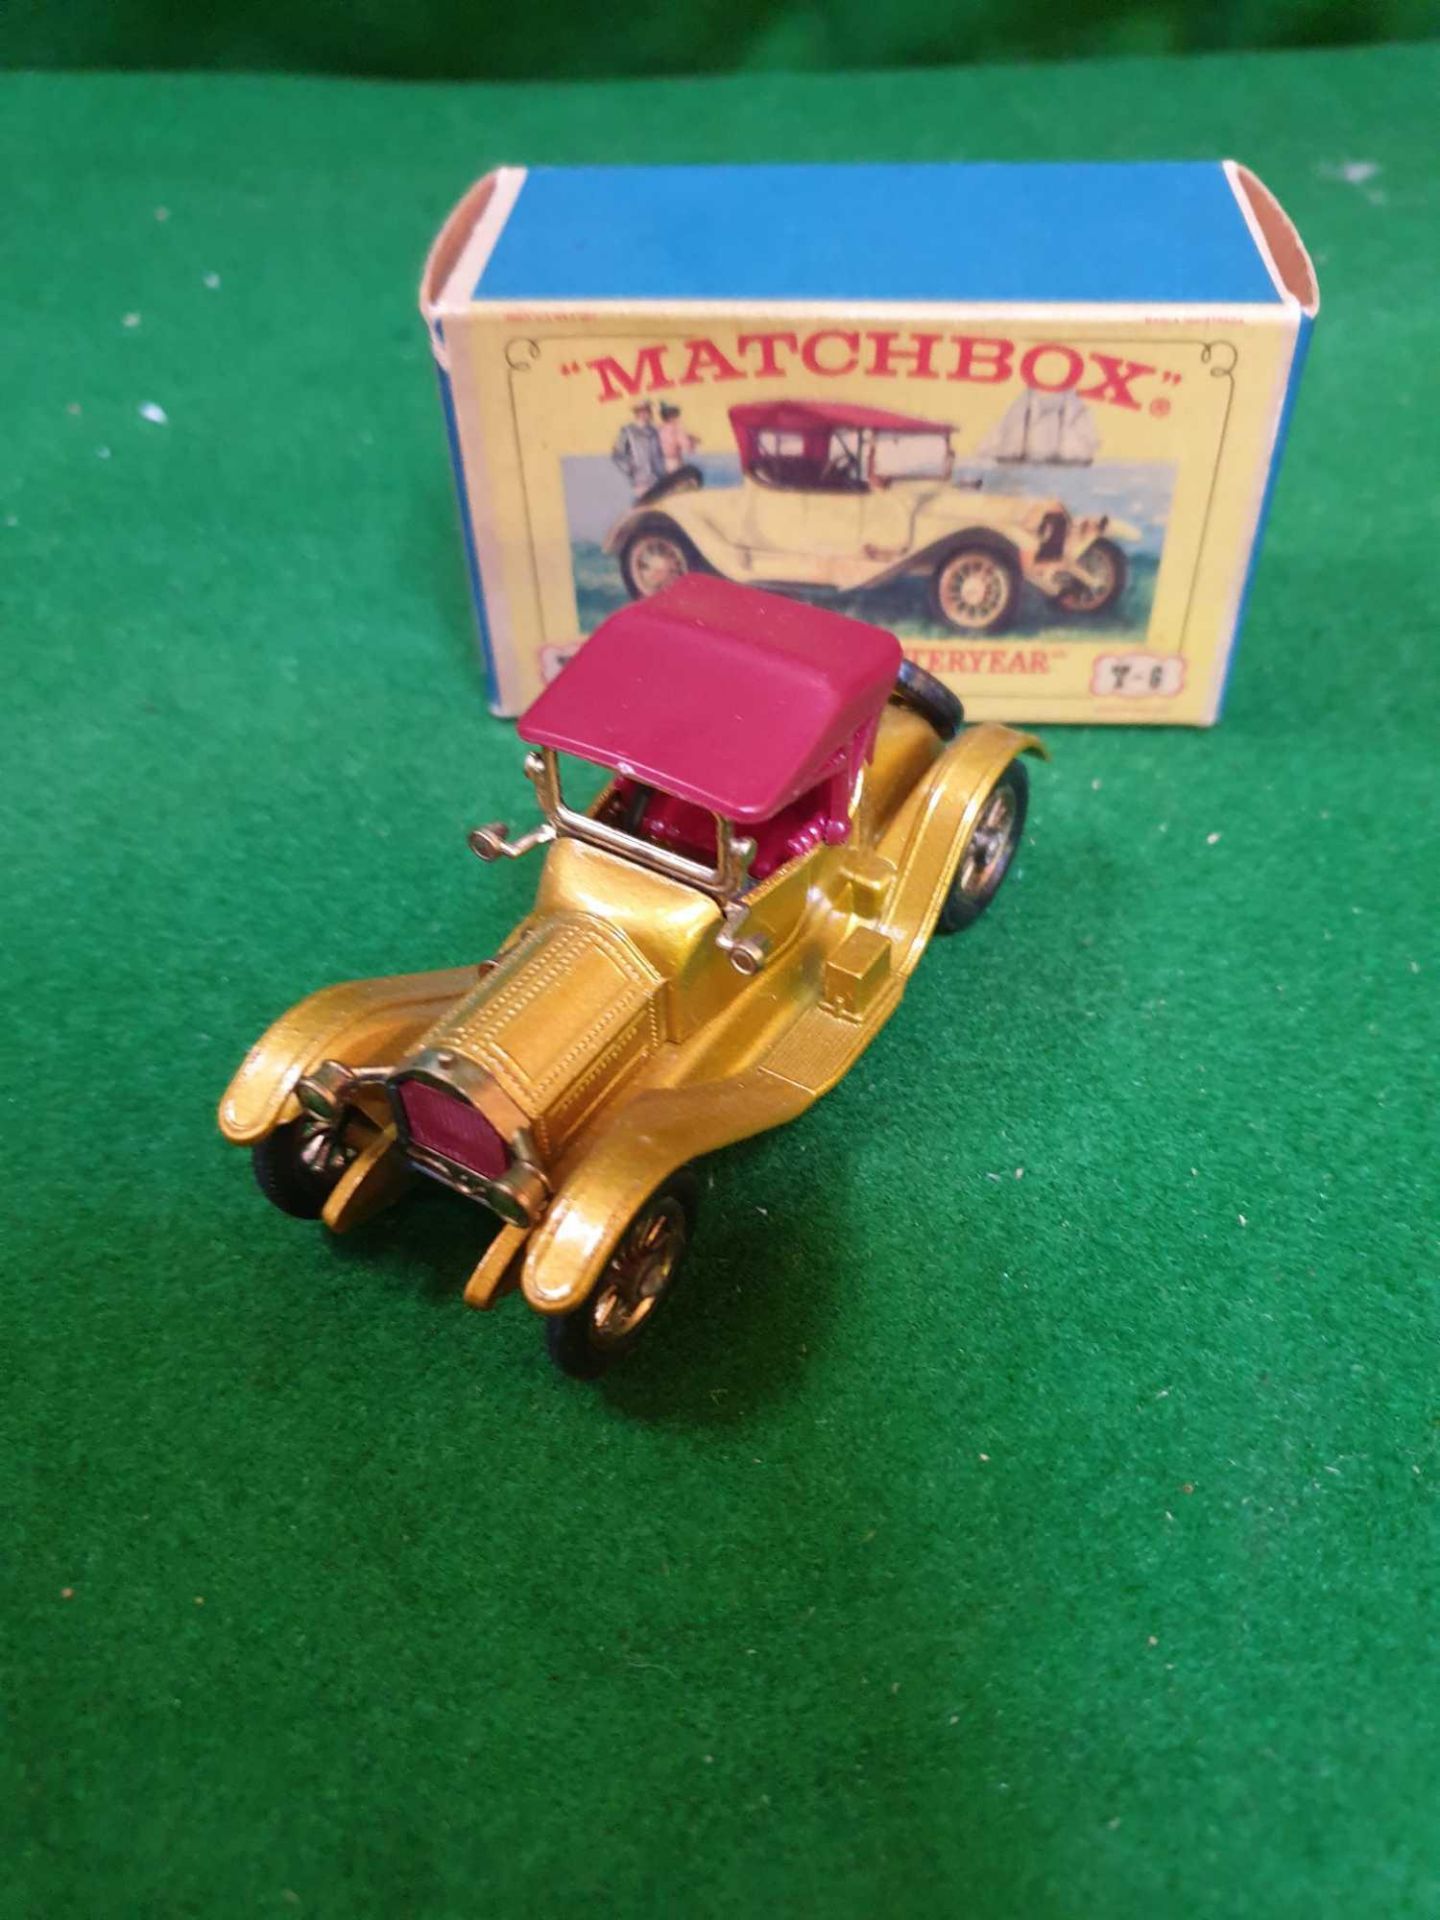 Matchbox Models Of Yesteryear Y6 1913 Cadillac Gold Red Roof Mint Model Firm Box - Image 3 of 3